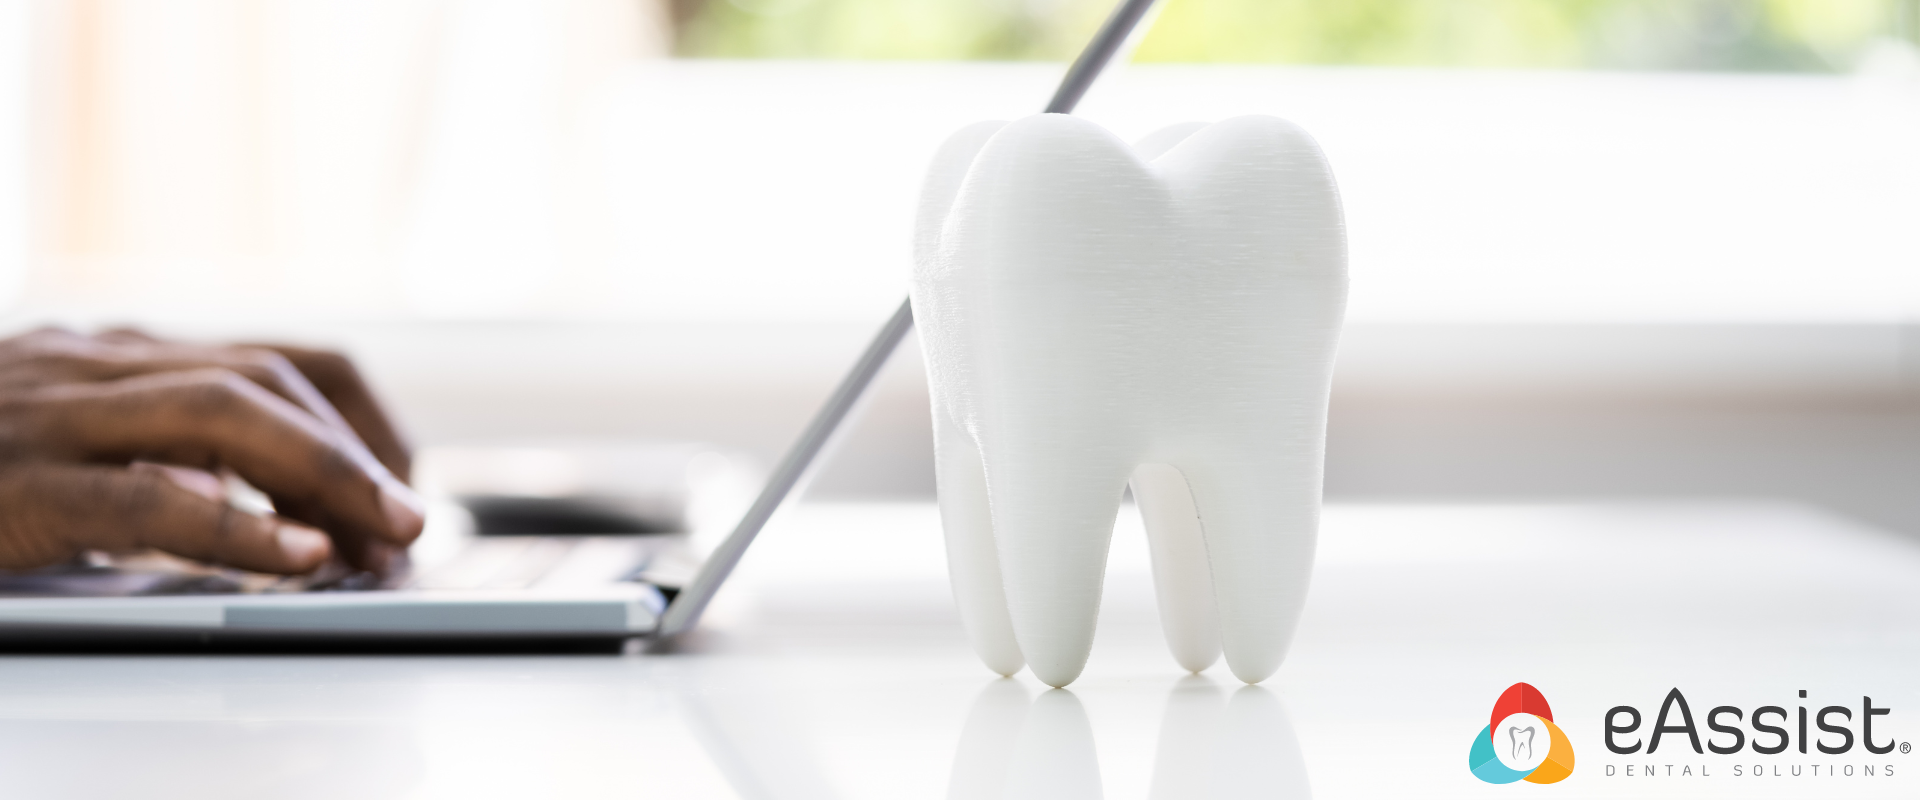 How Does Secondary Dental Insurance Work? 